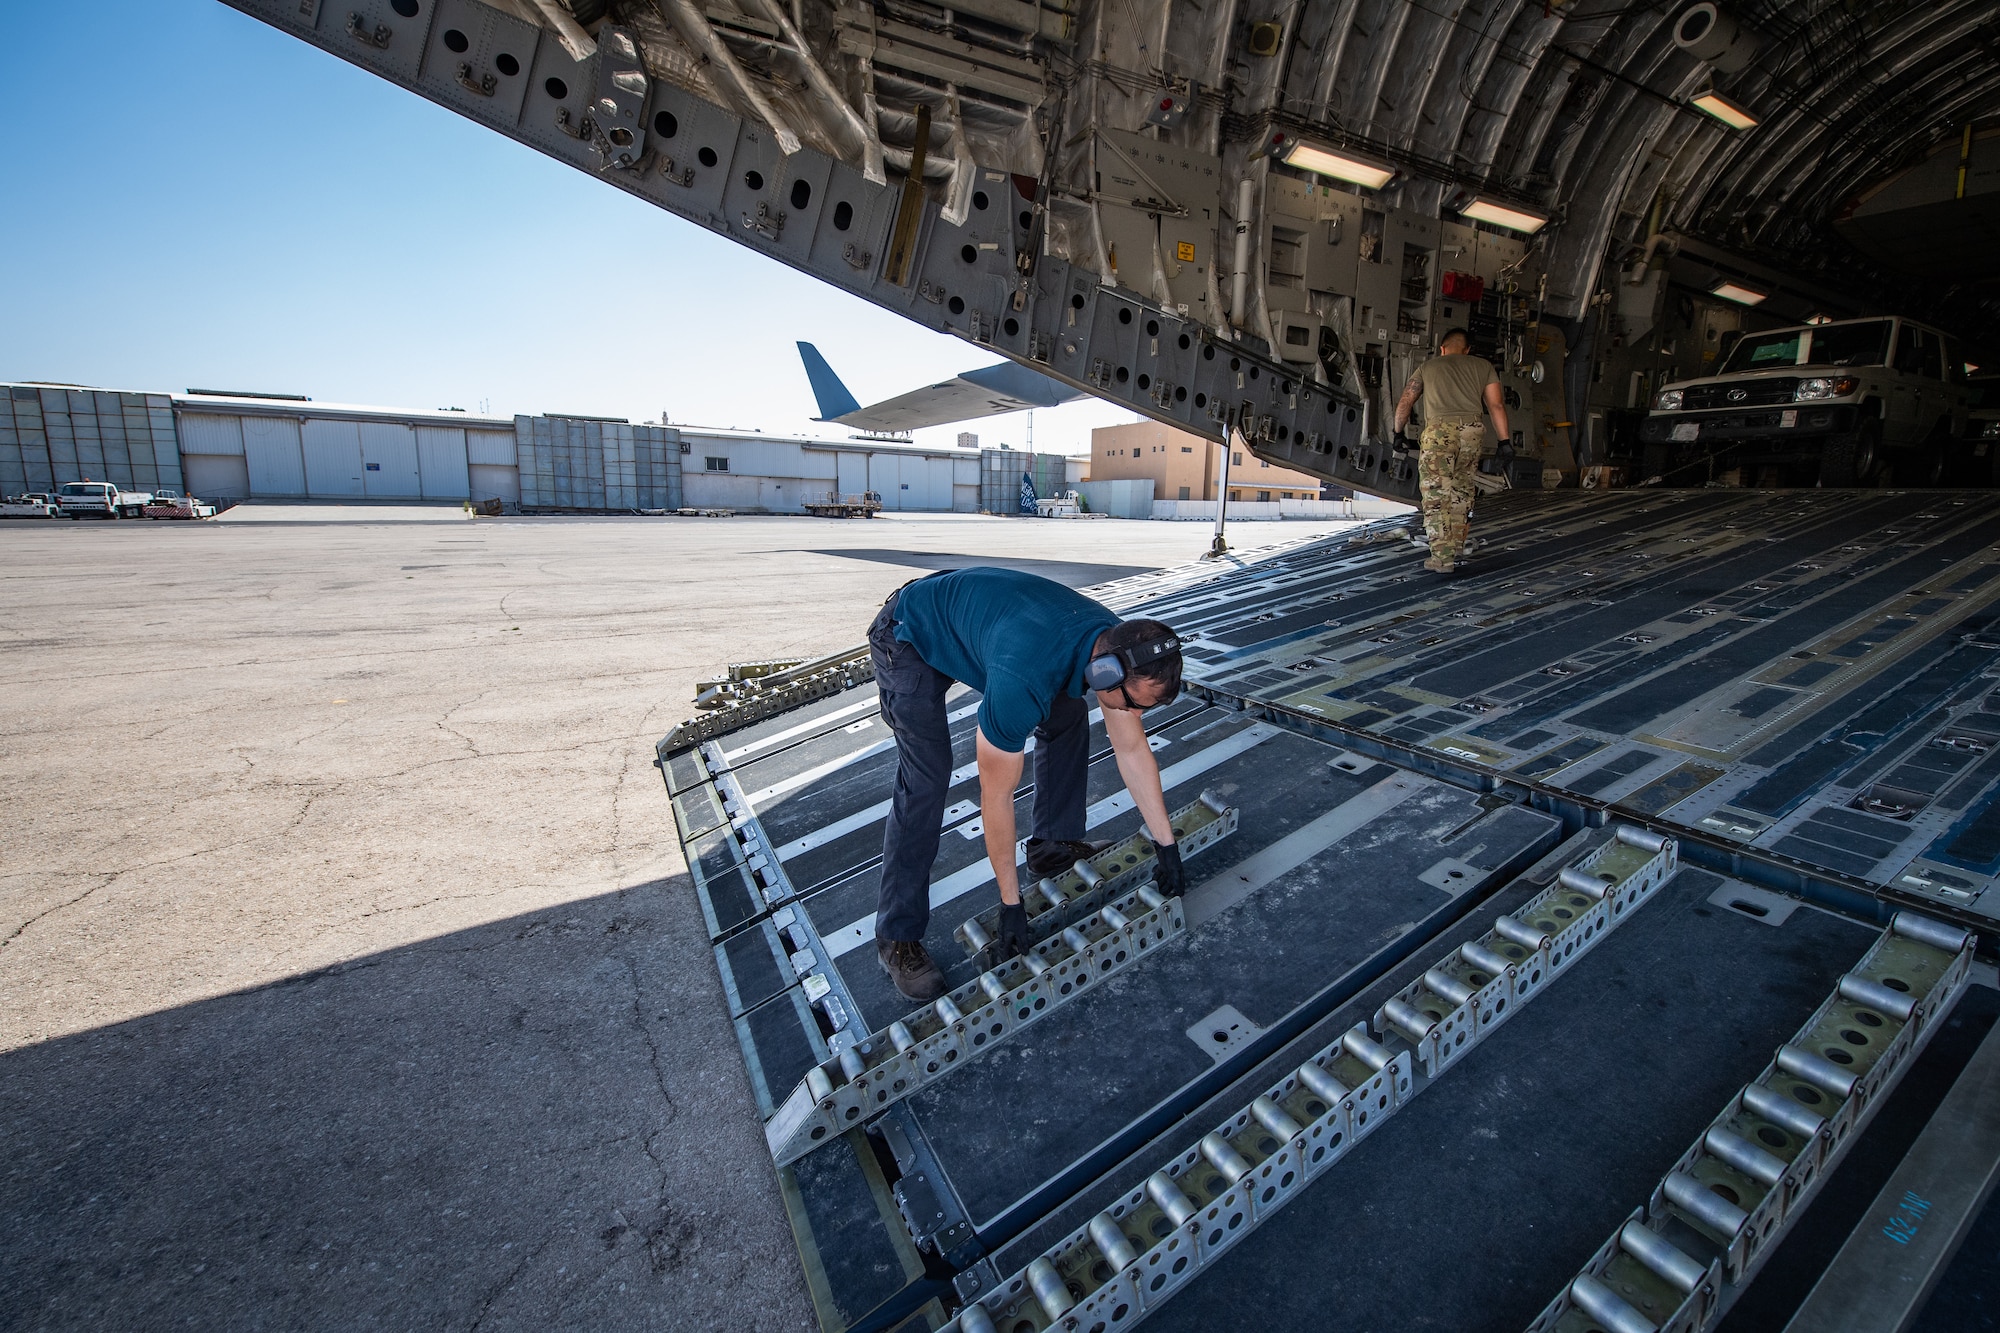 Staff Sgt. Tony Bellow, NCO-in-charge of Cargo Operations, Jordan Port, 387th Air Expeditionary Squadron, removes rollers from the cargo ramp of a U.S. Air Force C-17 Globemaster III before unloading vehicles in Jordan, Oct. 14, 2019.